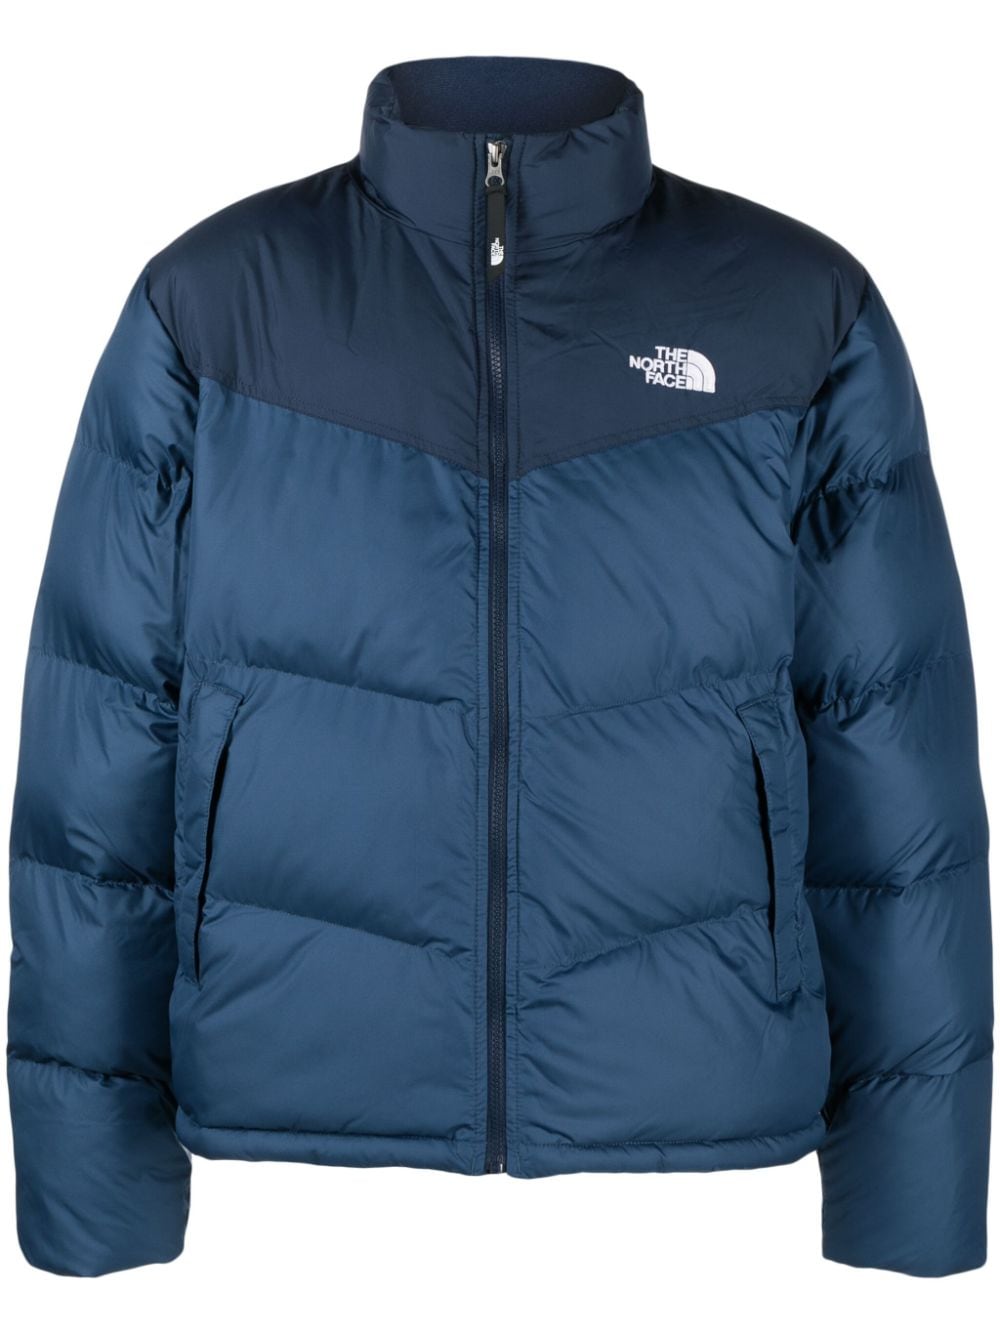 The North Face Jackets for Men - Sustainable - FARFETCH